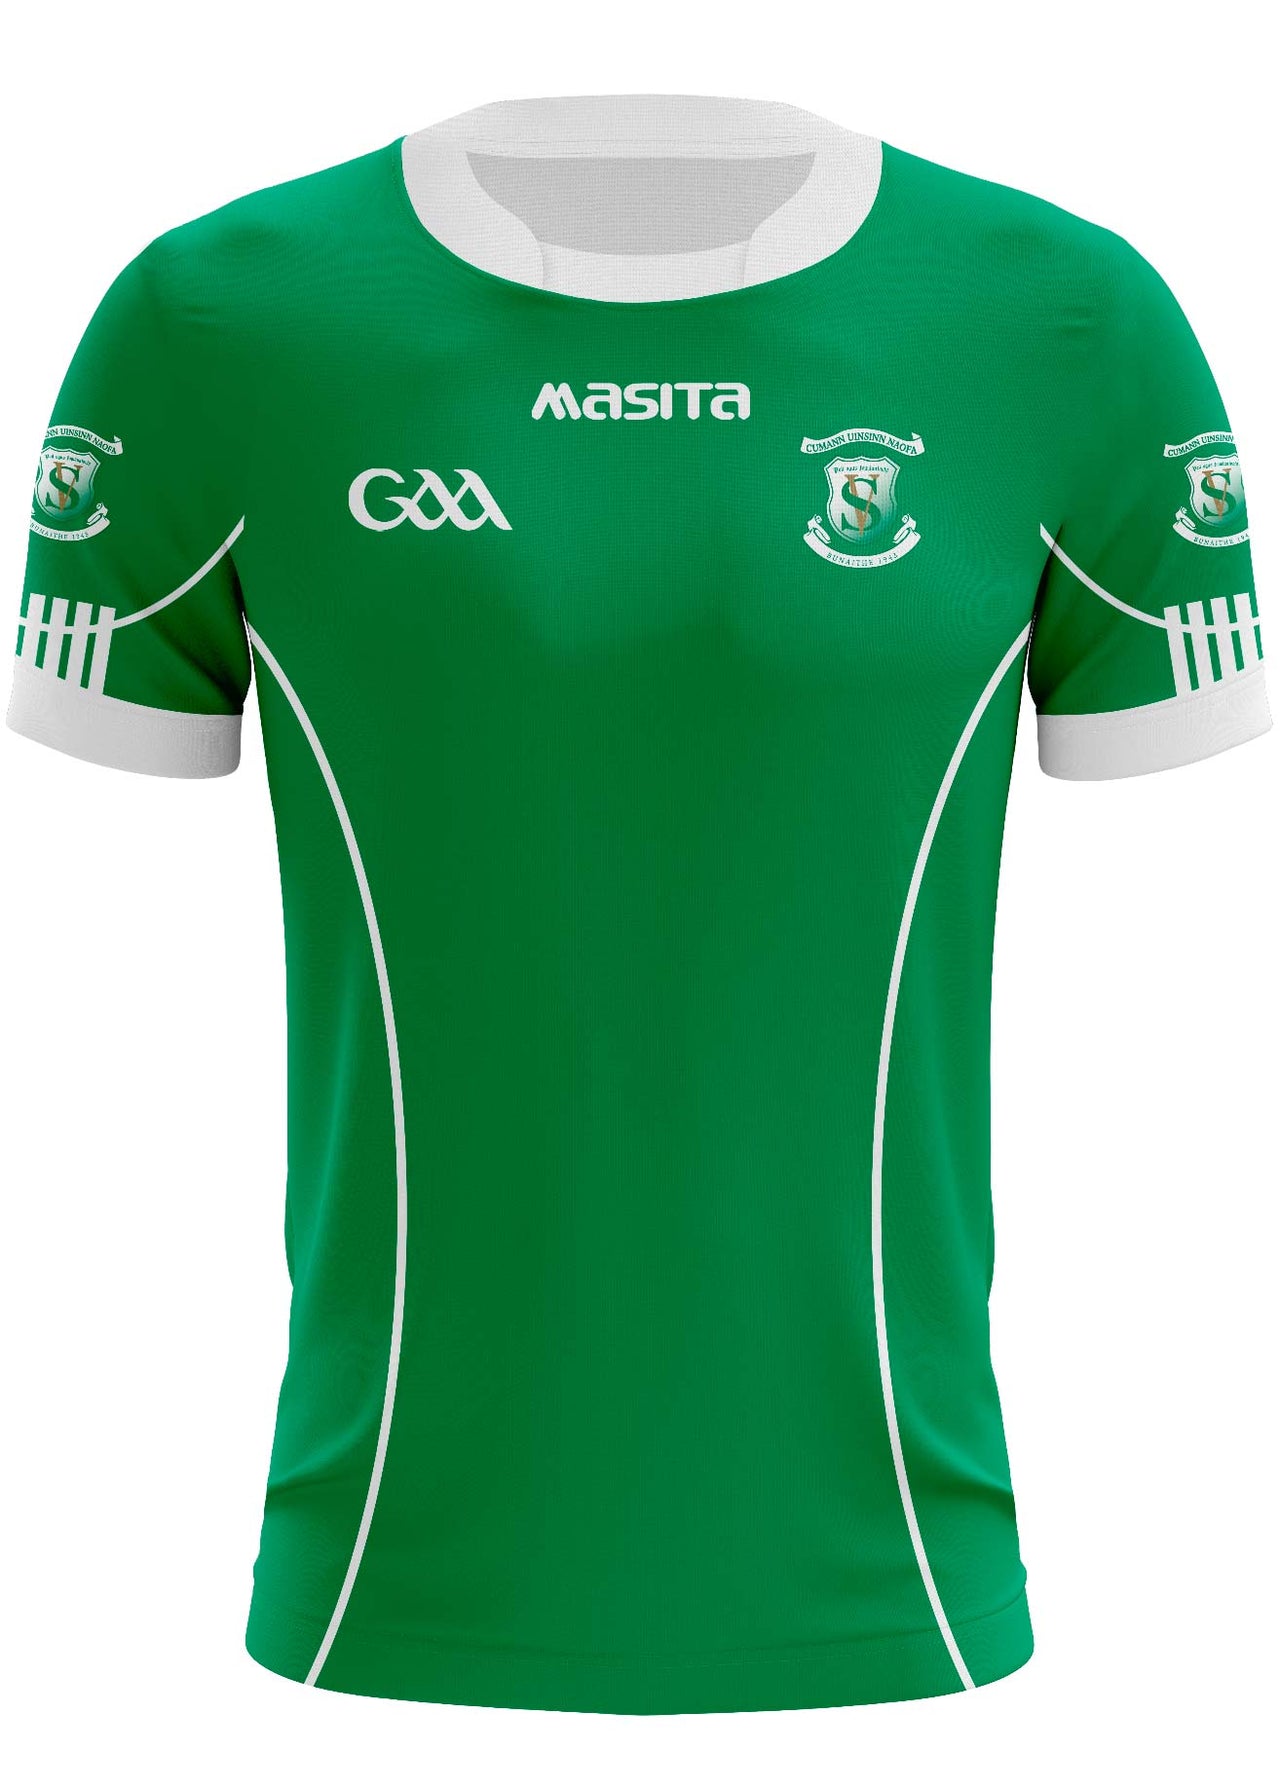 St Vincent's GAA Home Jersey Player Fit